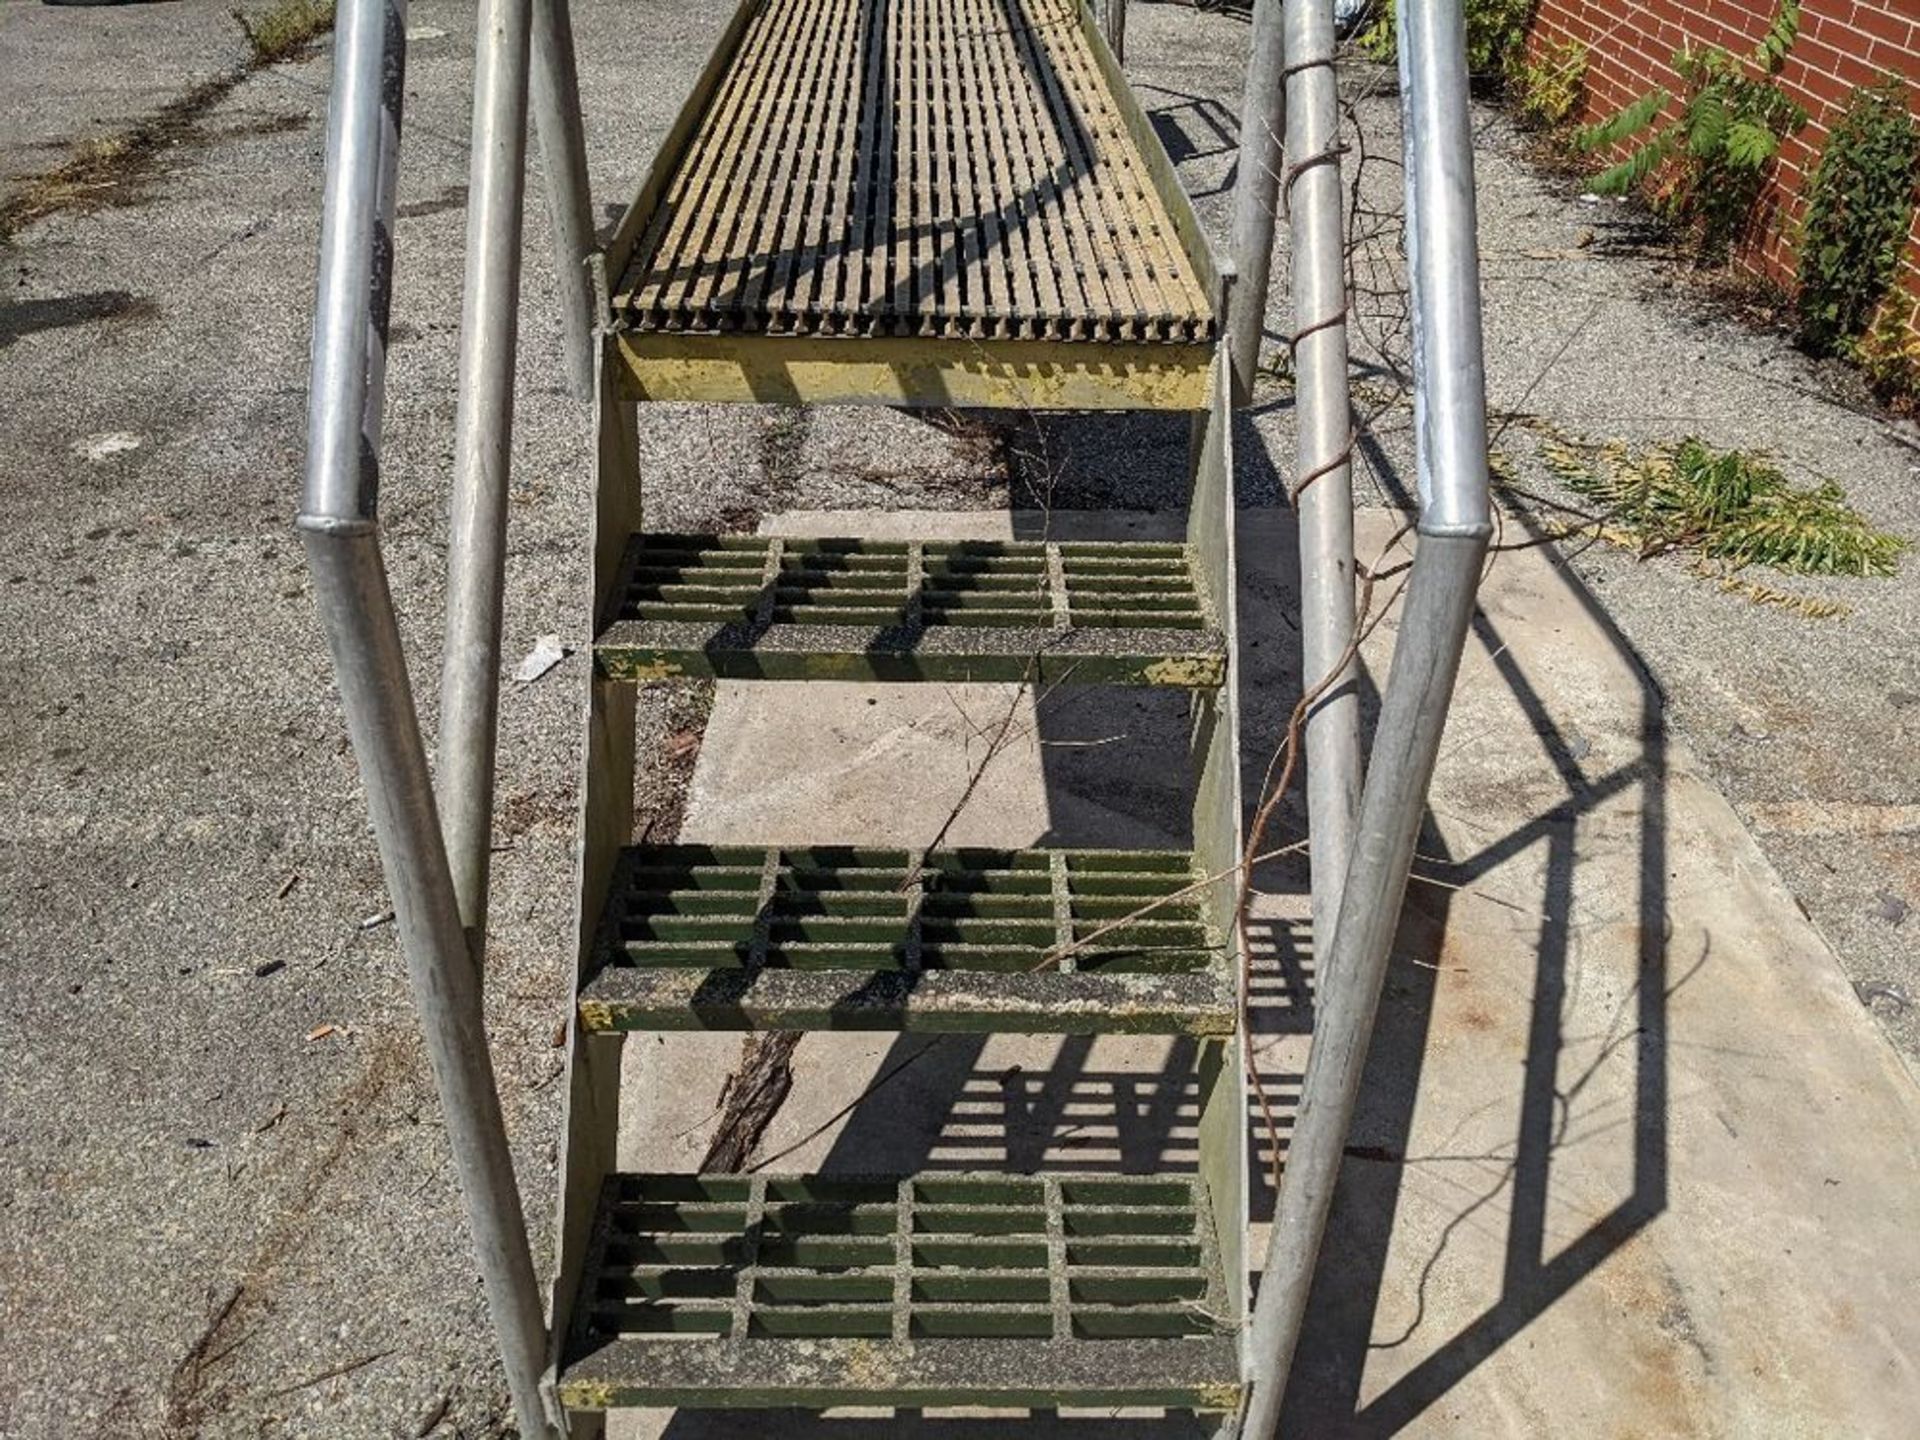 Qty (1) Conveyor Walk over Platform - Stainless steel construction - 4 steps each side - Clearance - Image 3 of 3